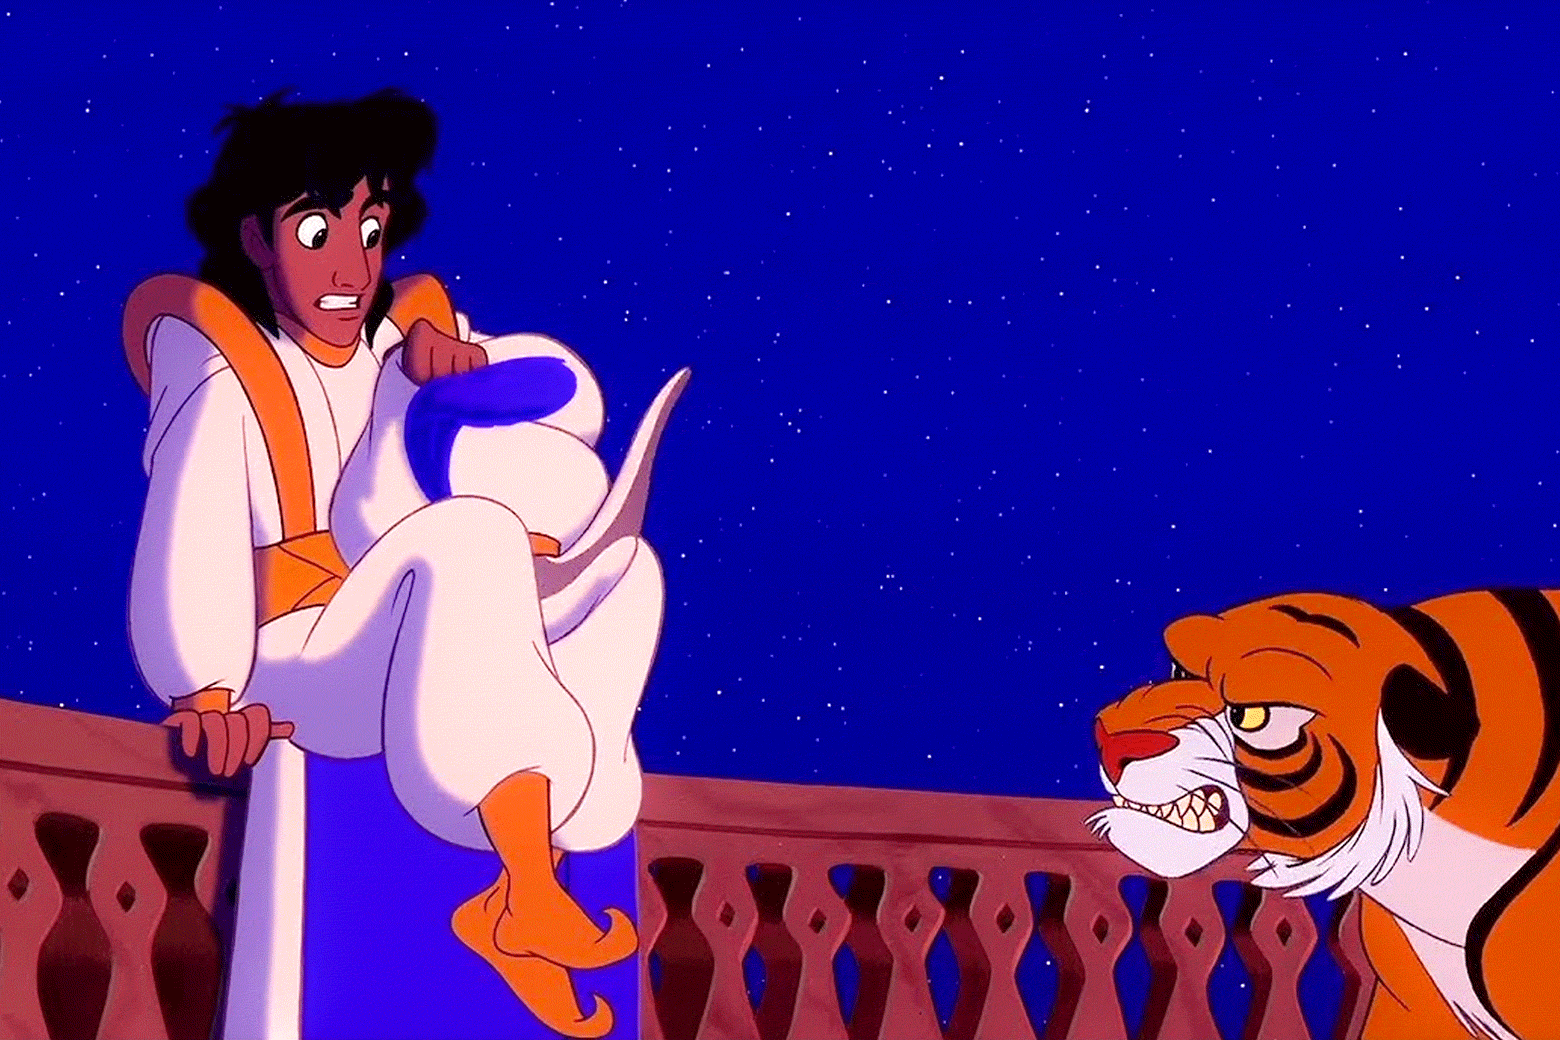 Why Everyone Thought Aladdin Had a Secret Sex Message